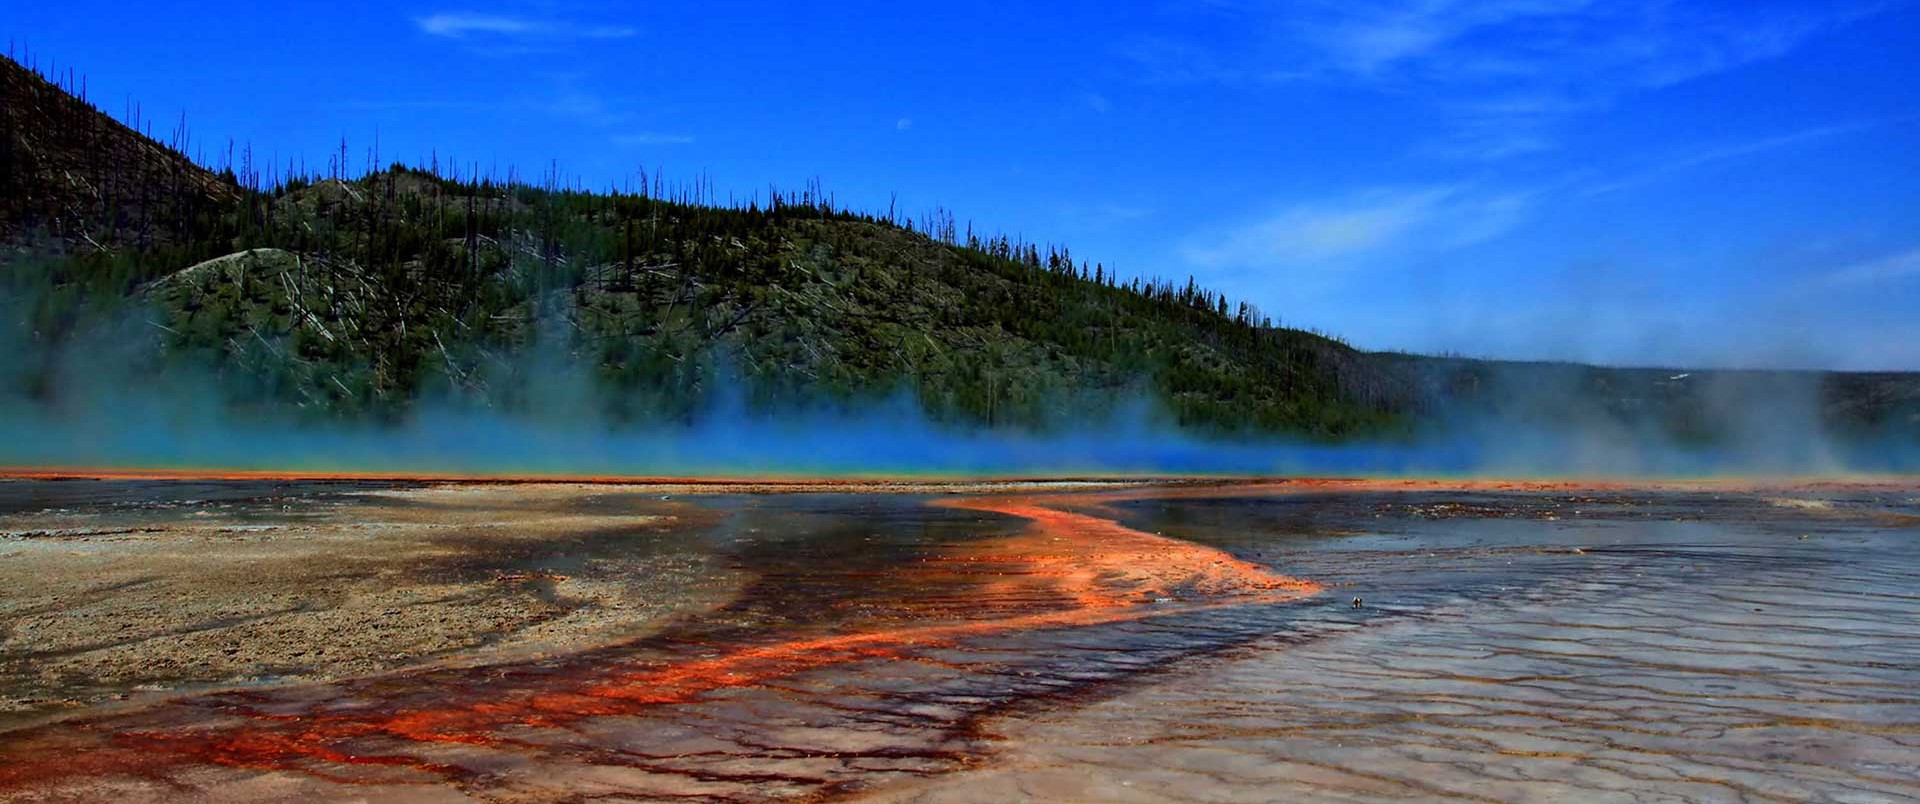 The Grand Prismatic Spring of Yellowstone National Park showing steam rising from hot water, which is surrounded by huge mats of brilliant orange algae and bacteria